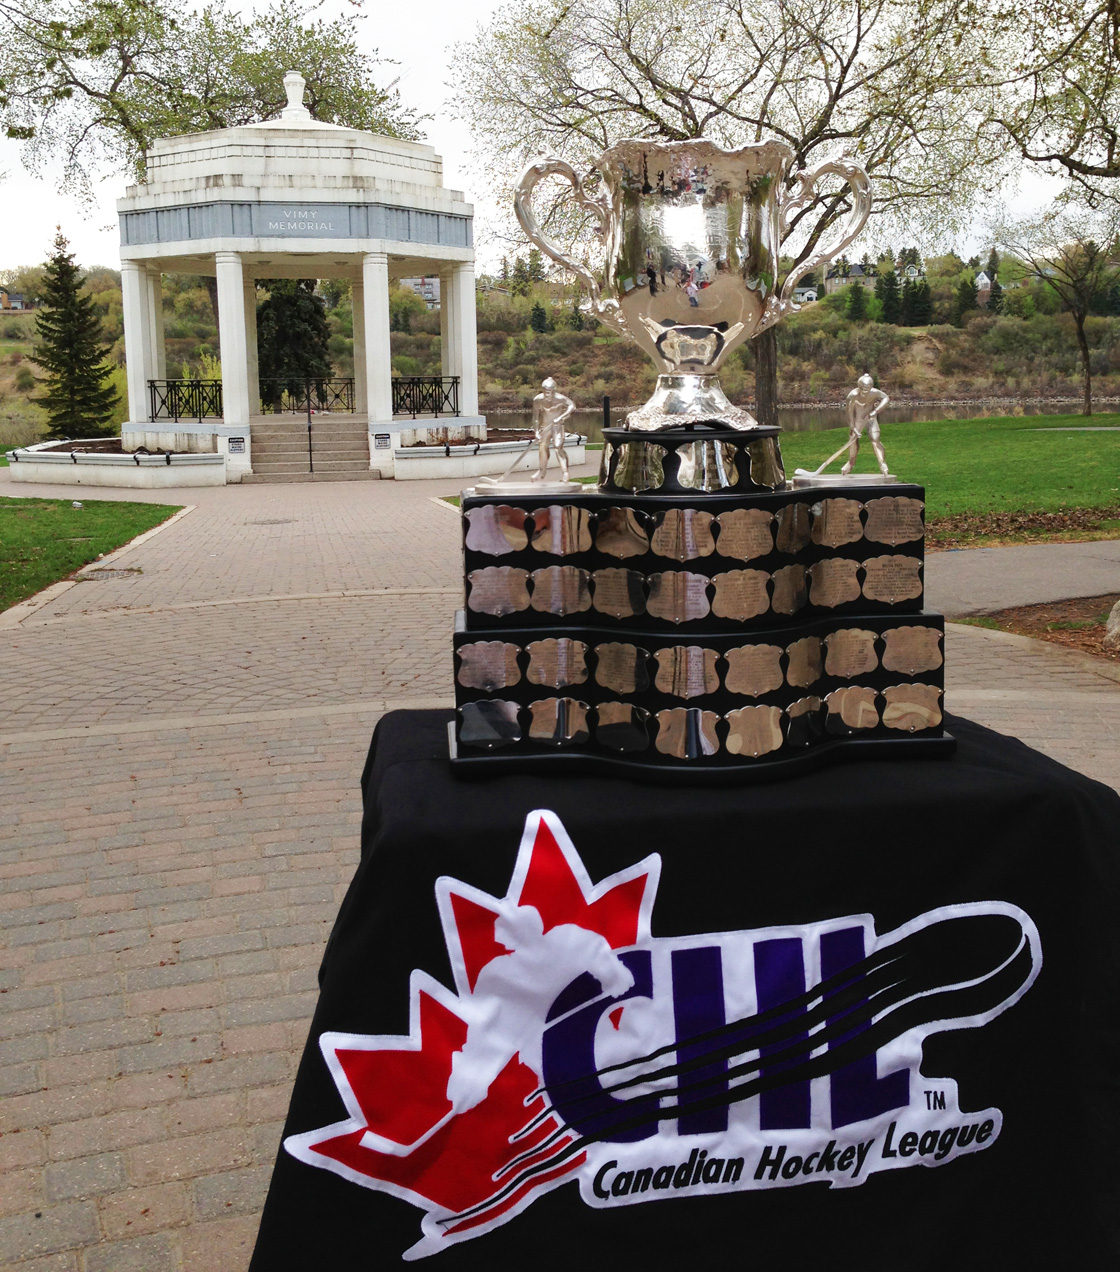 Saskatoon is hosting the MasterCard Memorial Cup this year with a number of special events and activities.